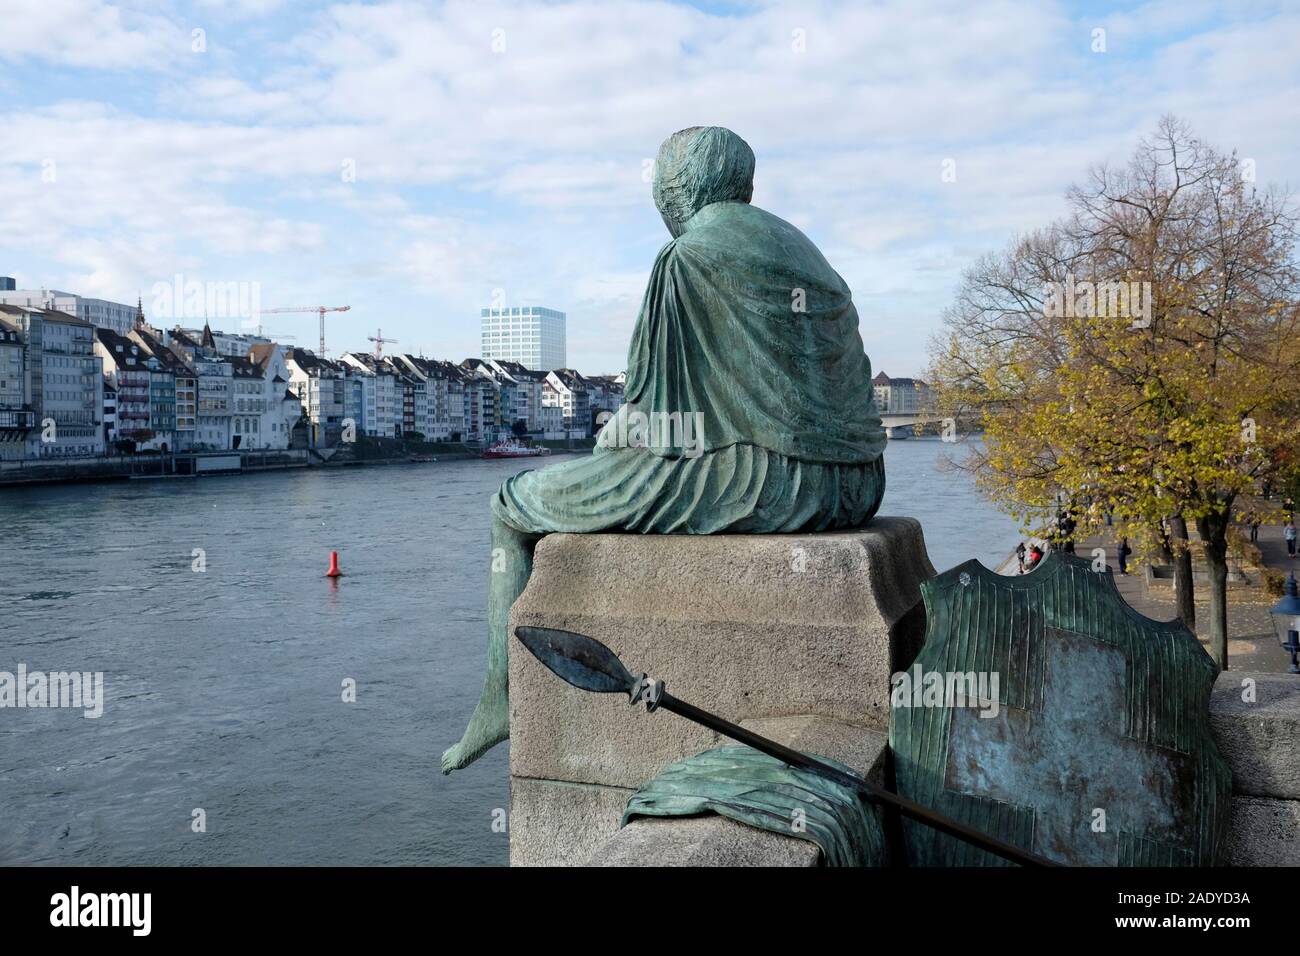 A view of Helvetia statue in Basel, Switzerland Stock Photo